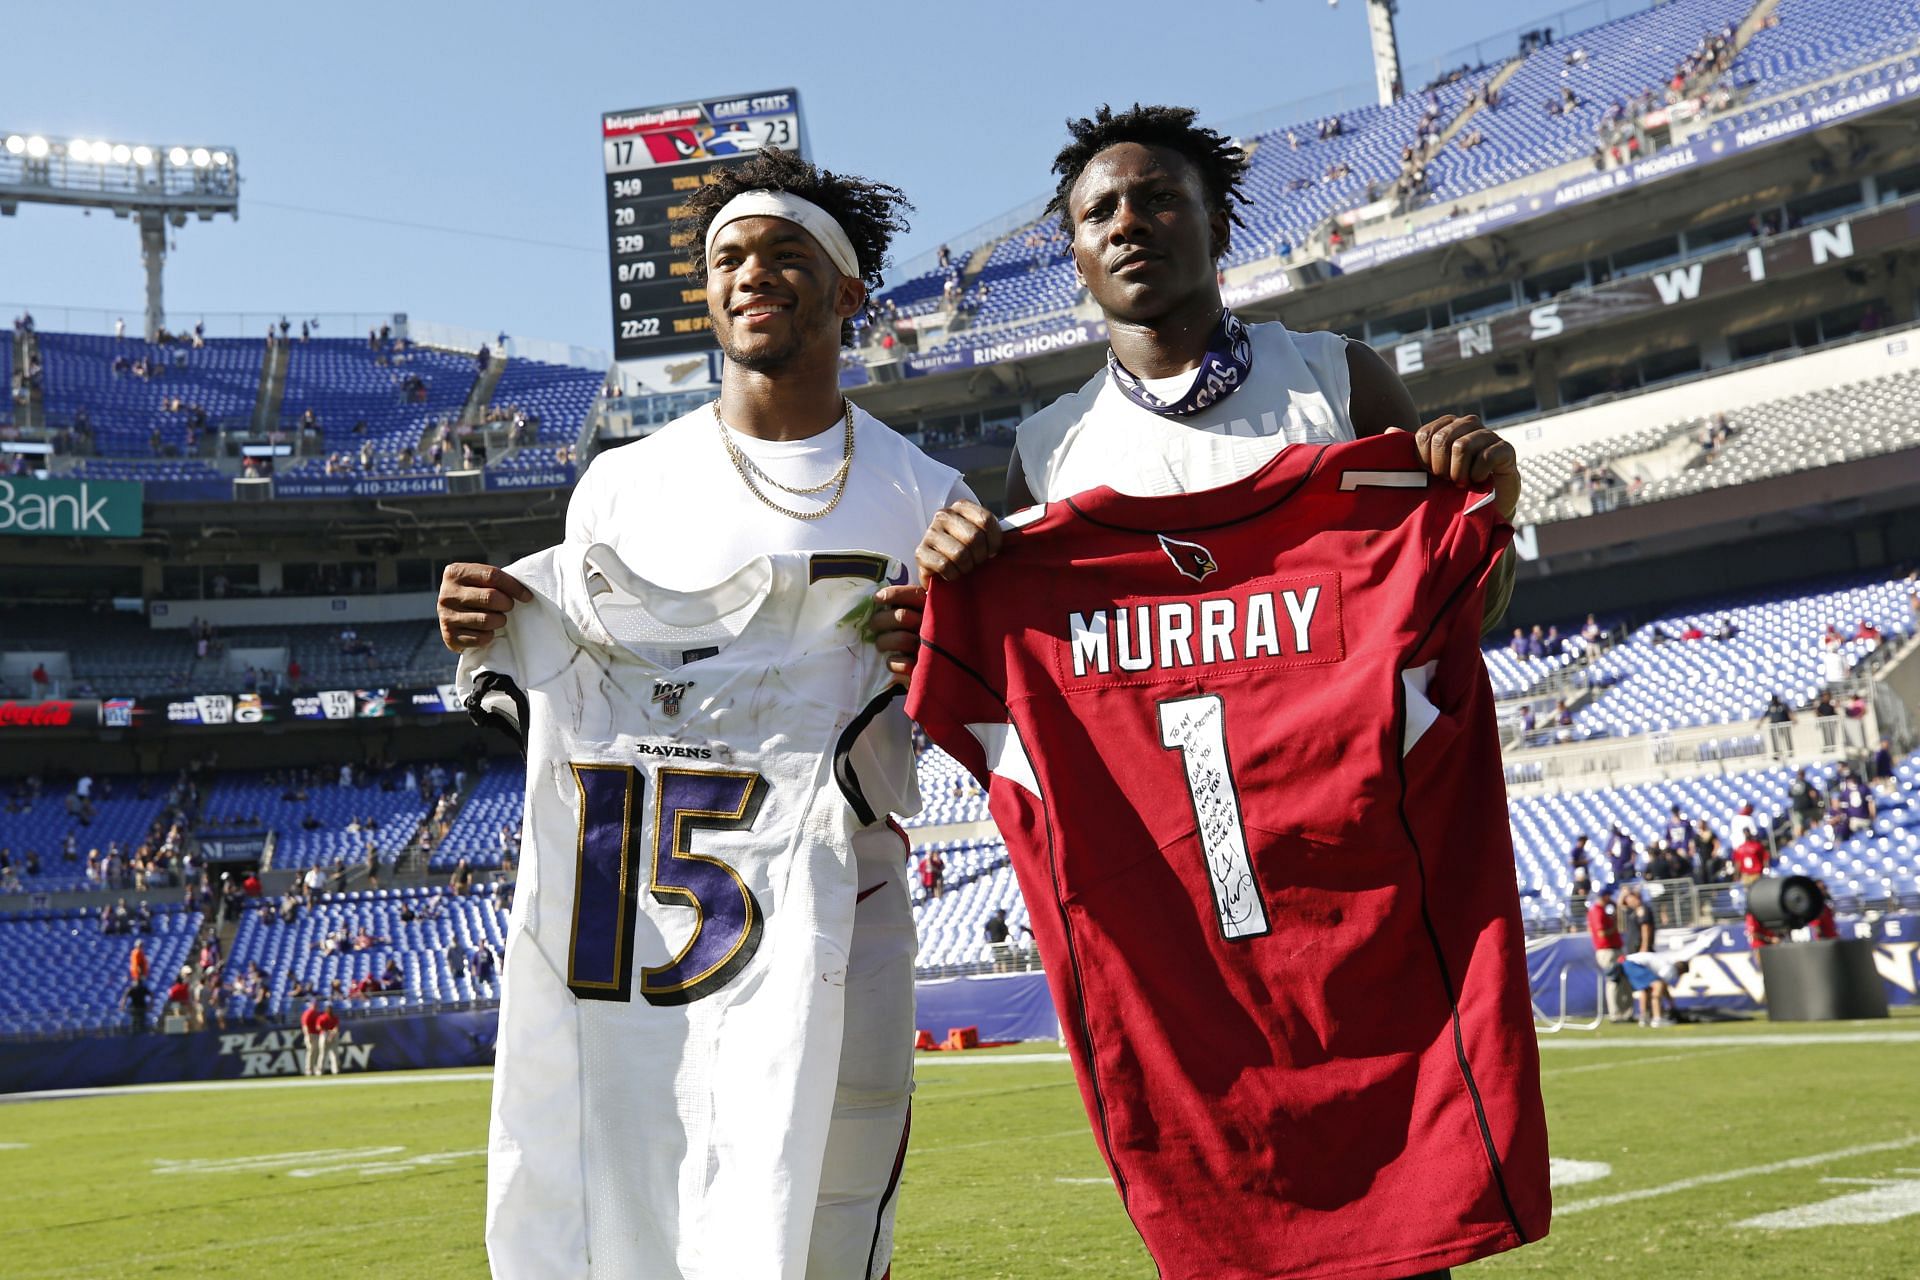 The Cardinals hope to capture lightning in a bottle with the Kyler Murray-Marquise Brown pairing.